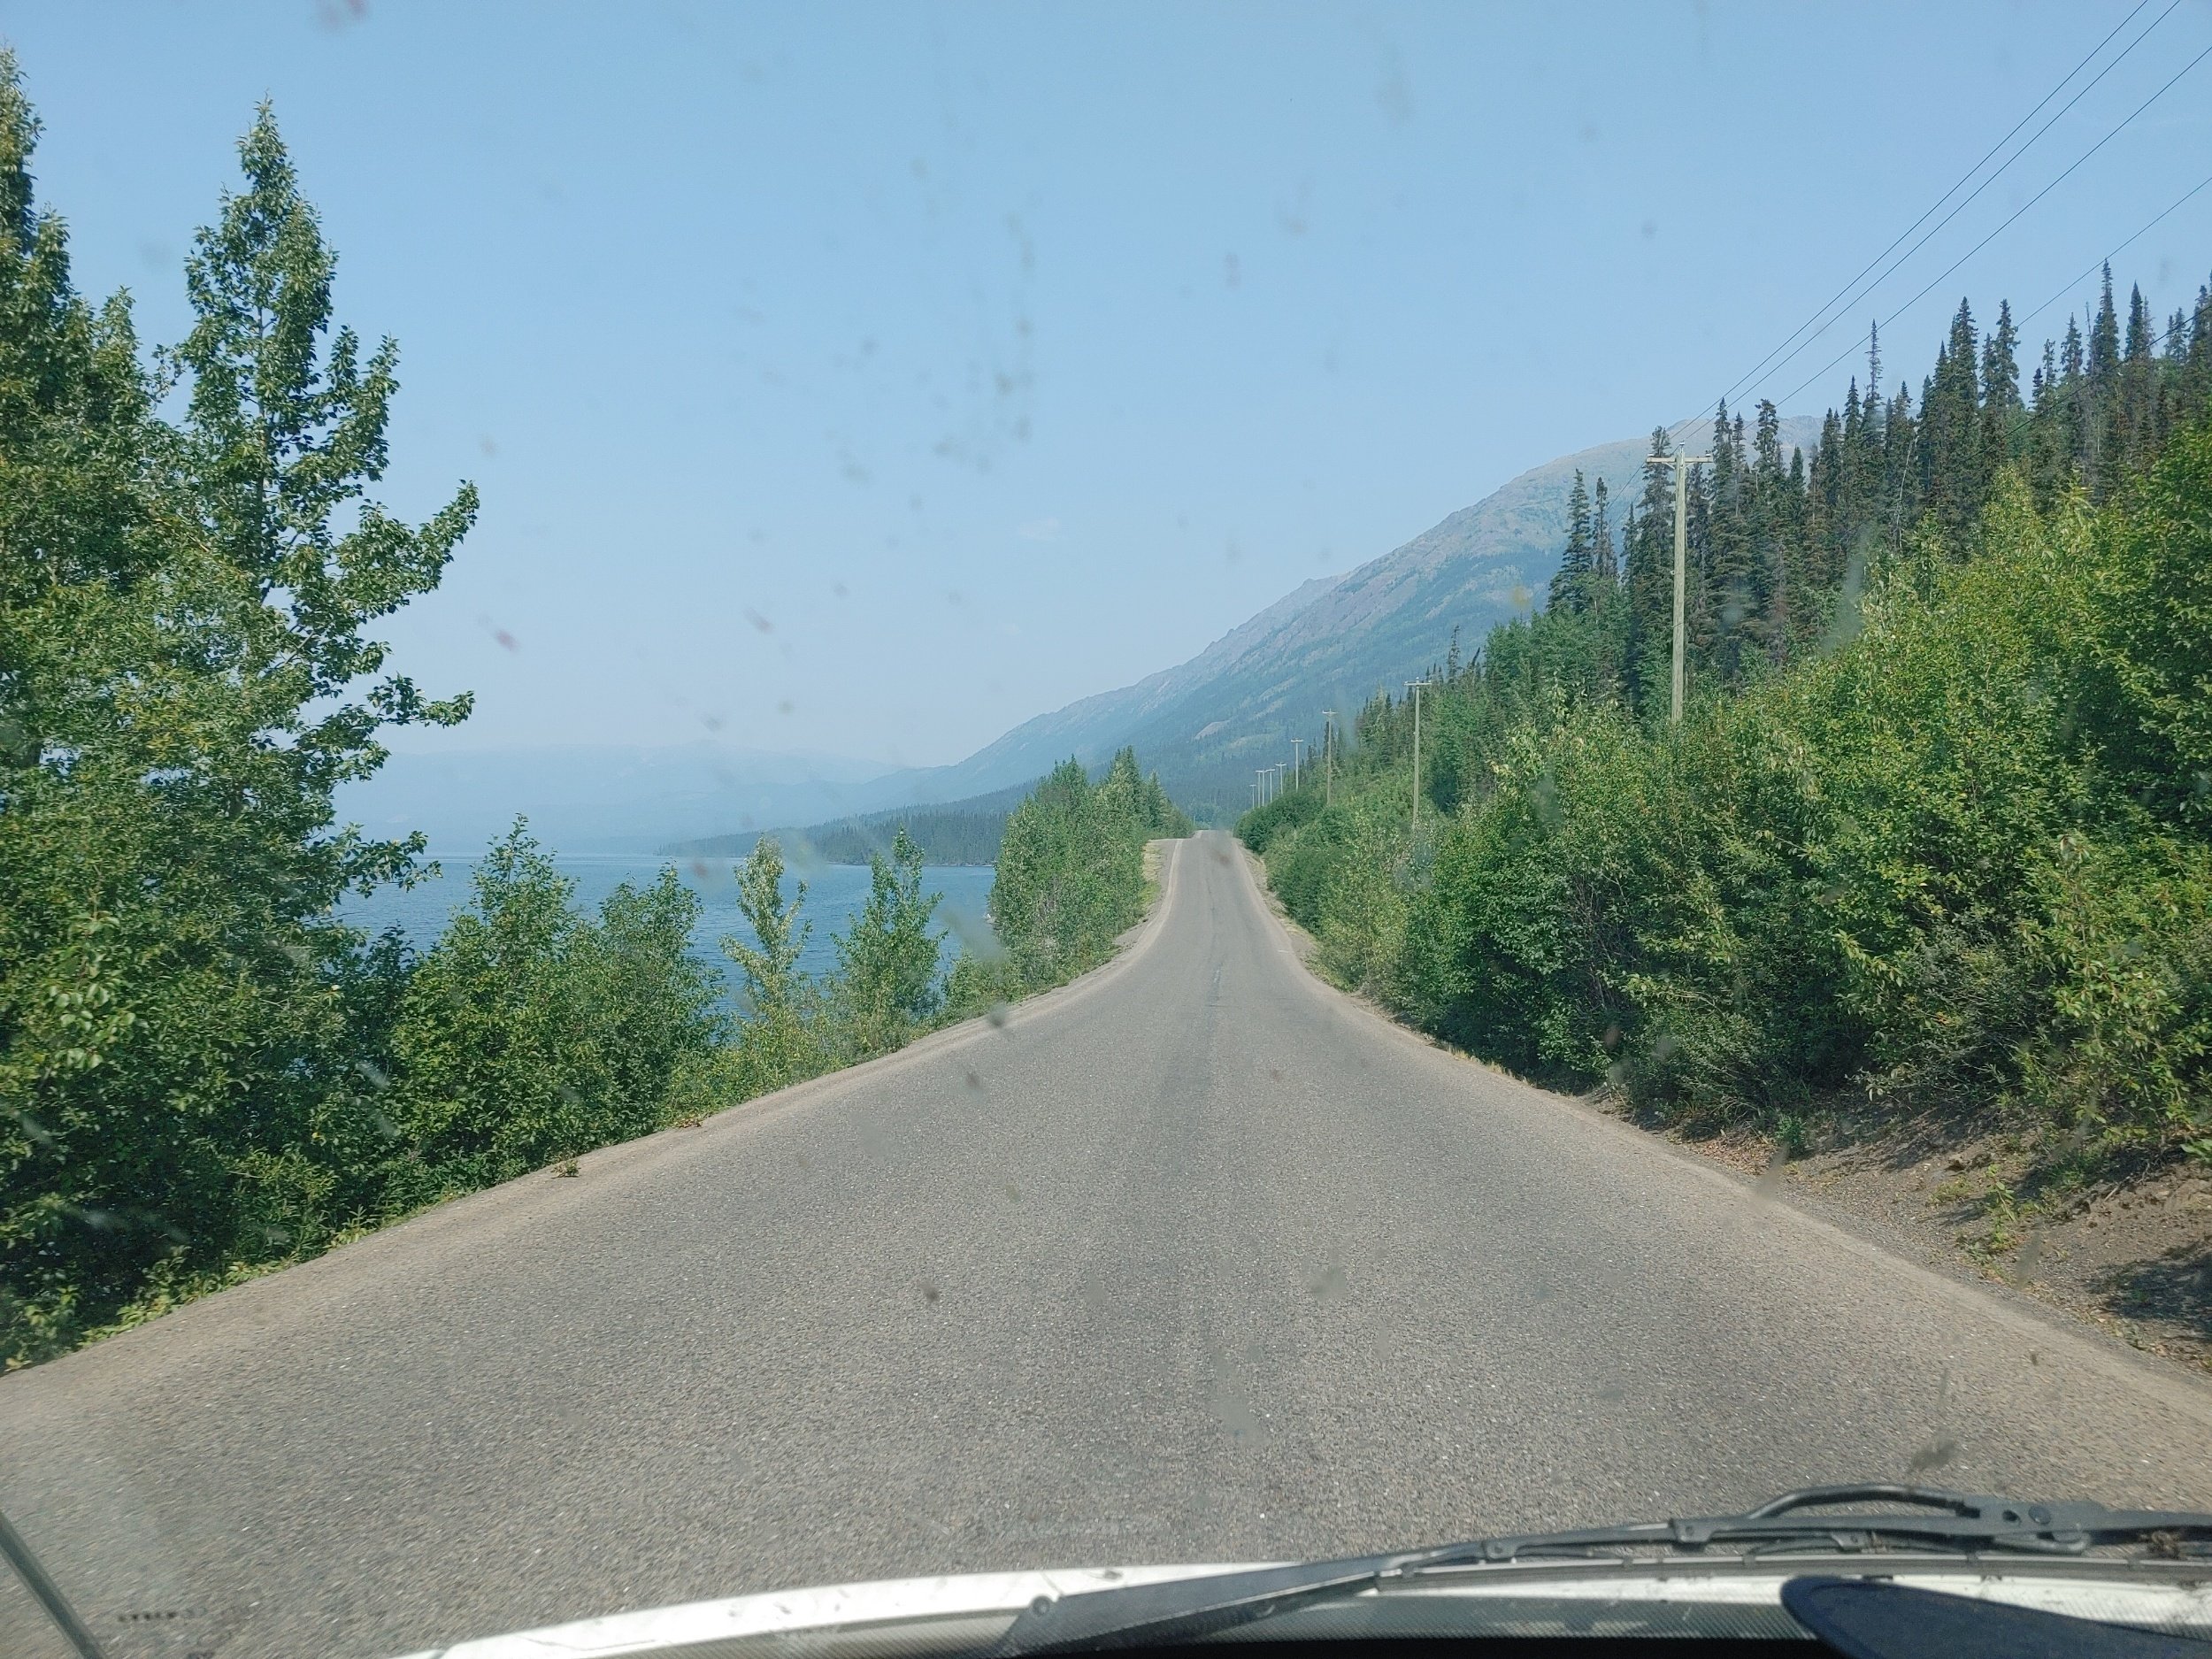  Cassiar highway on my way to Whitehorse… 11 hours, split across 2 days. 